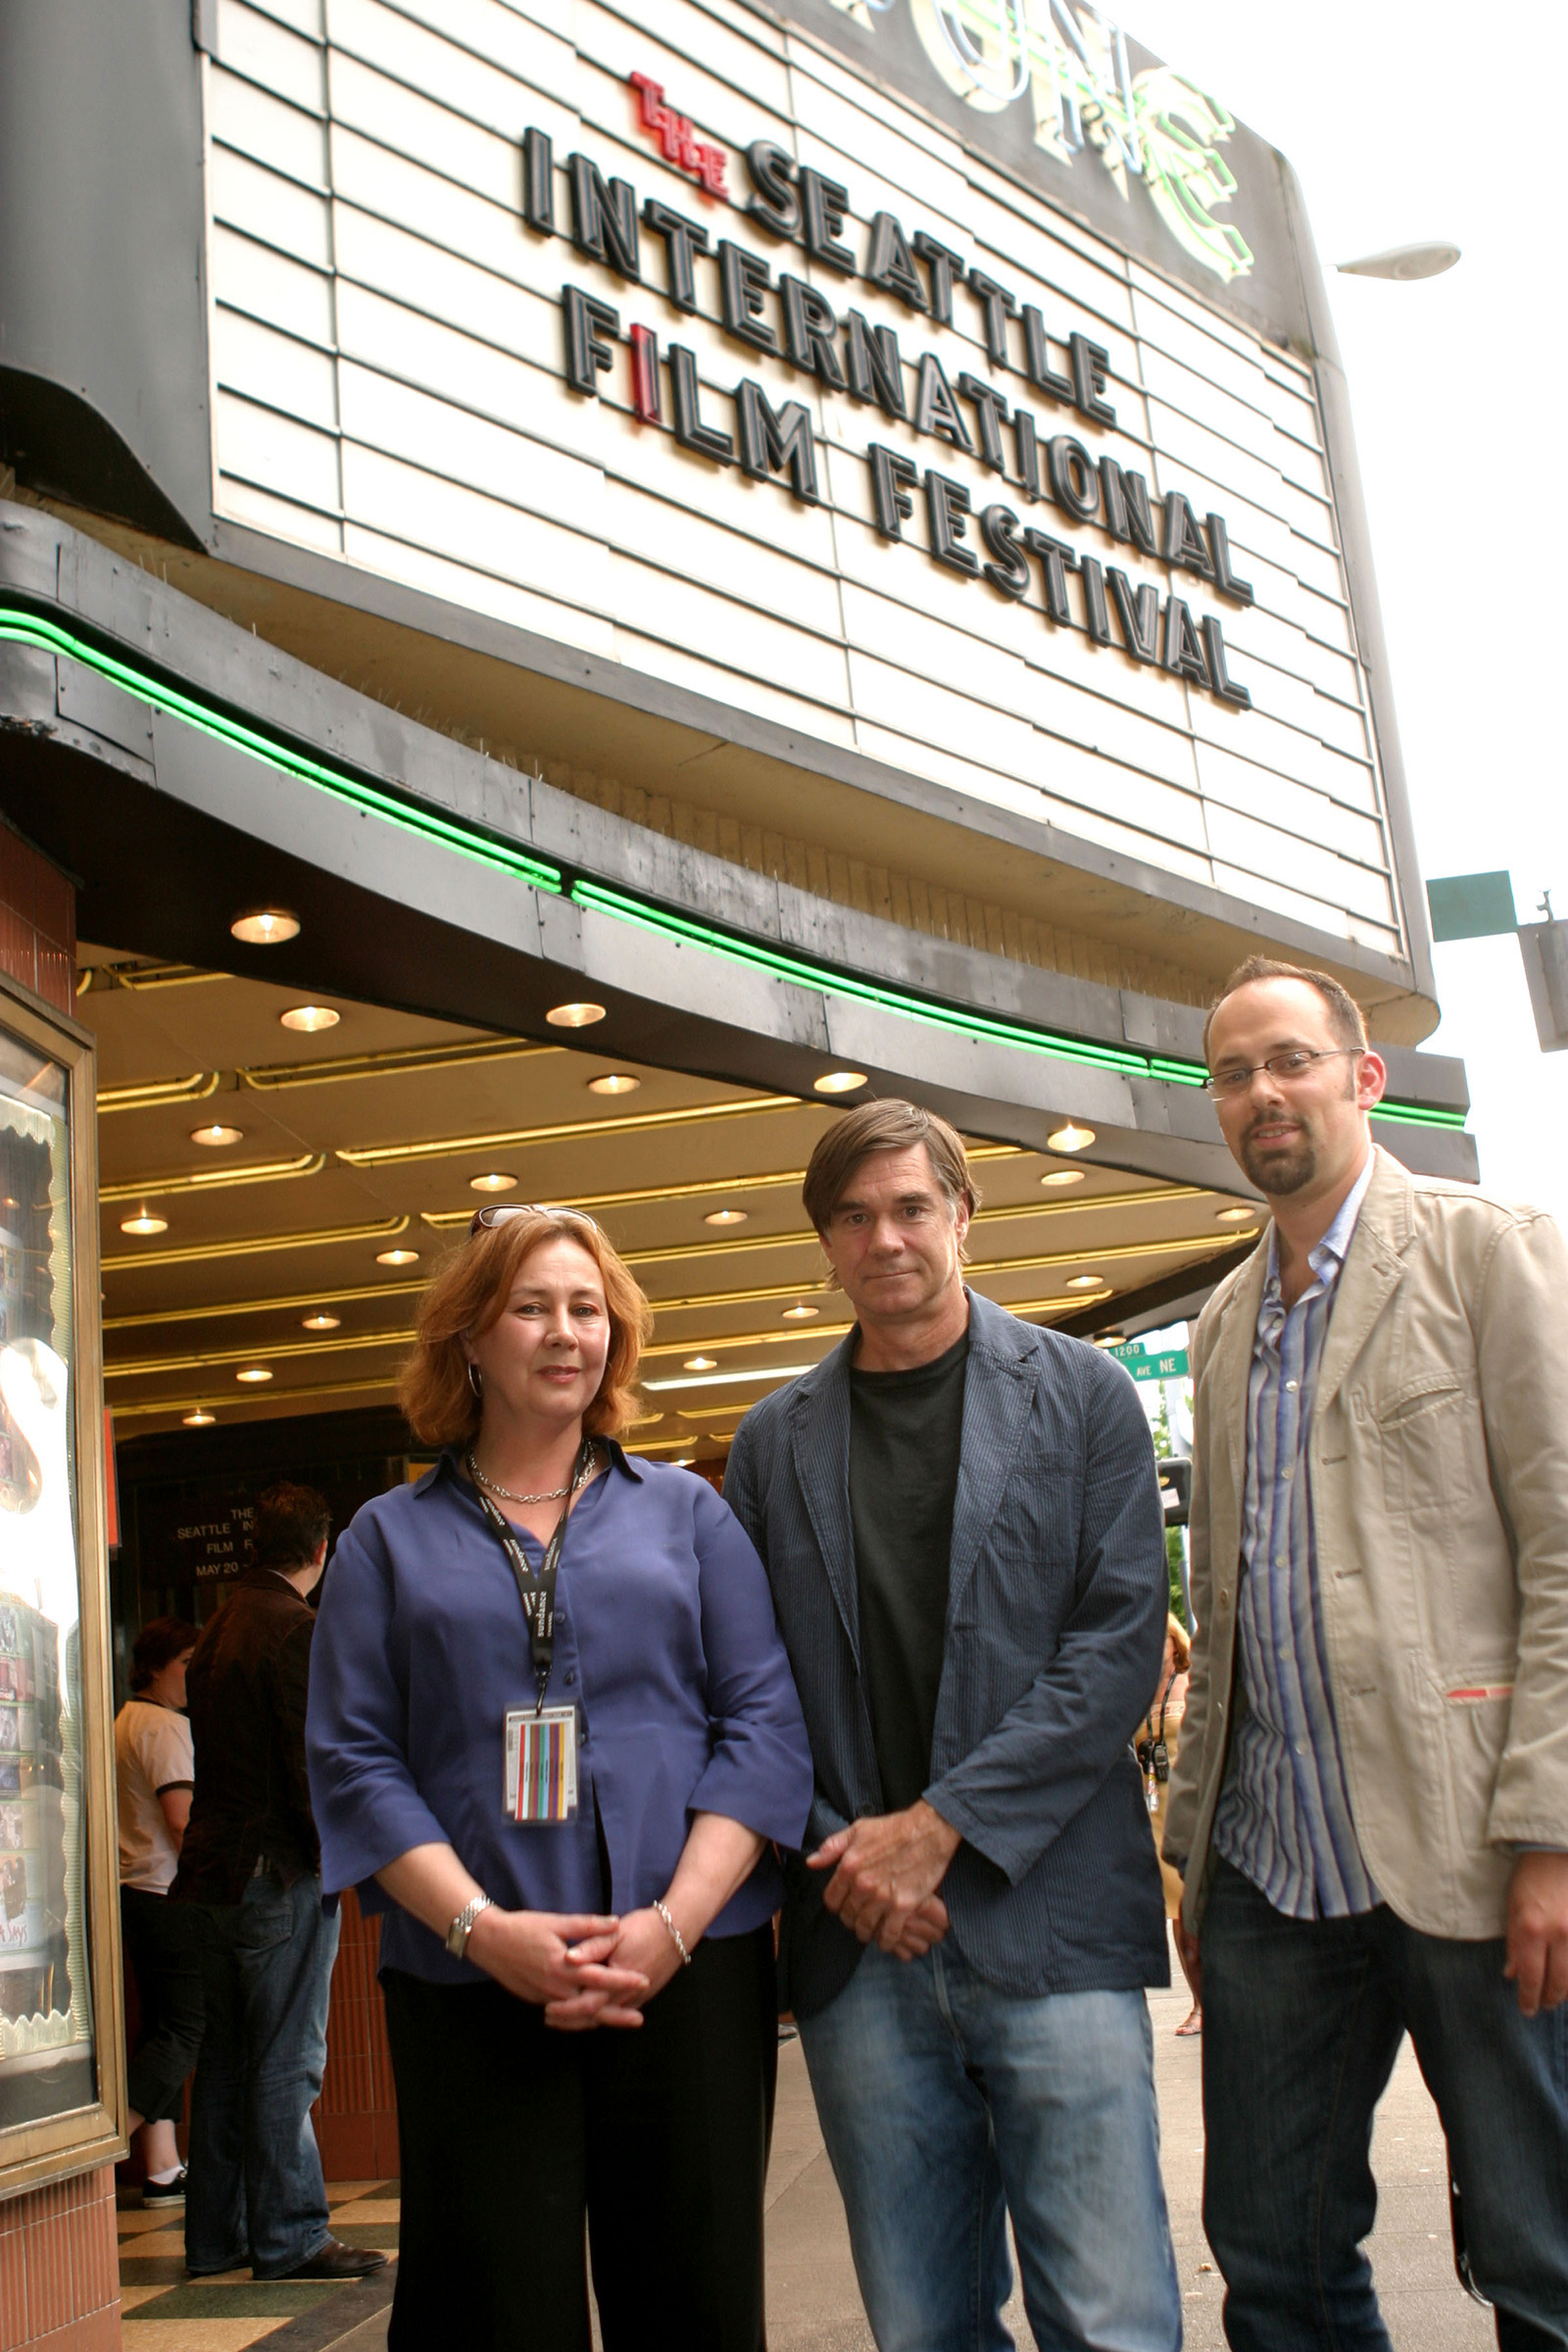 Festival Director, Helen Loveridge and Director of Programming, Carl Spence, pose with director, Gus Van Sant, for the North American Premiere of his film, Last Days, at the Neptune Theatre